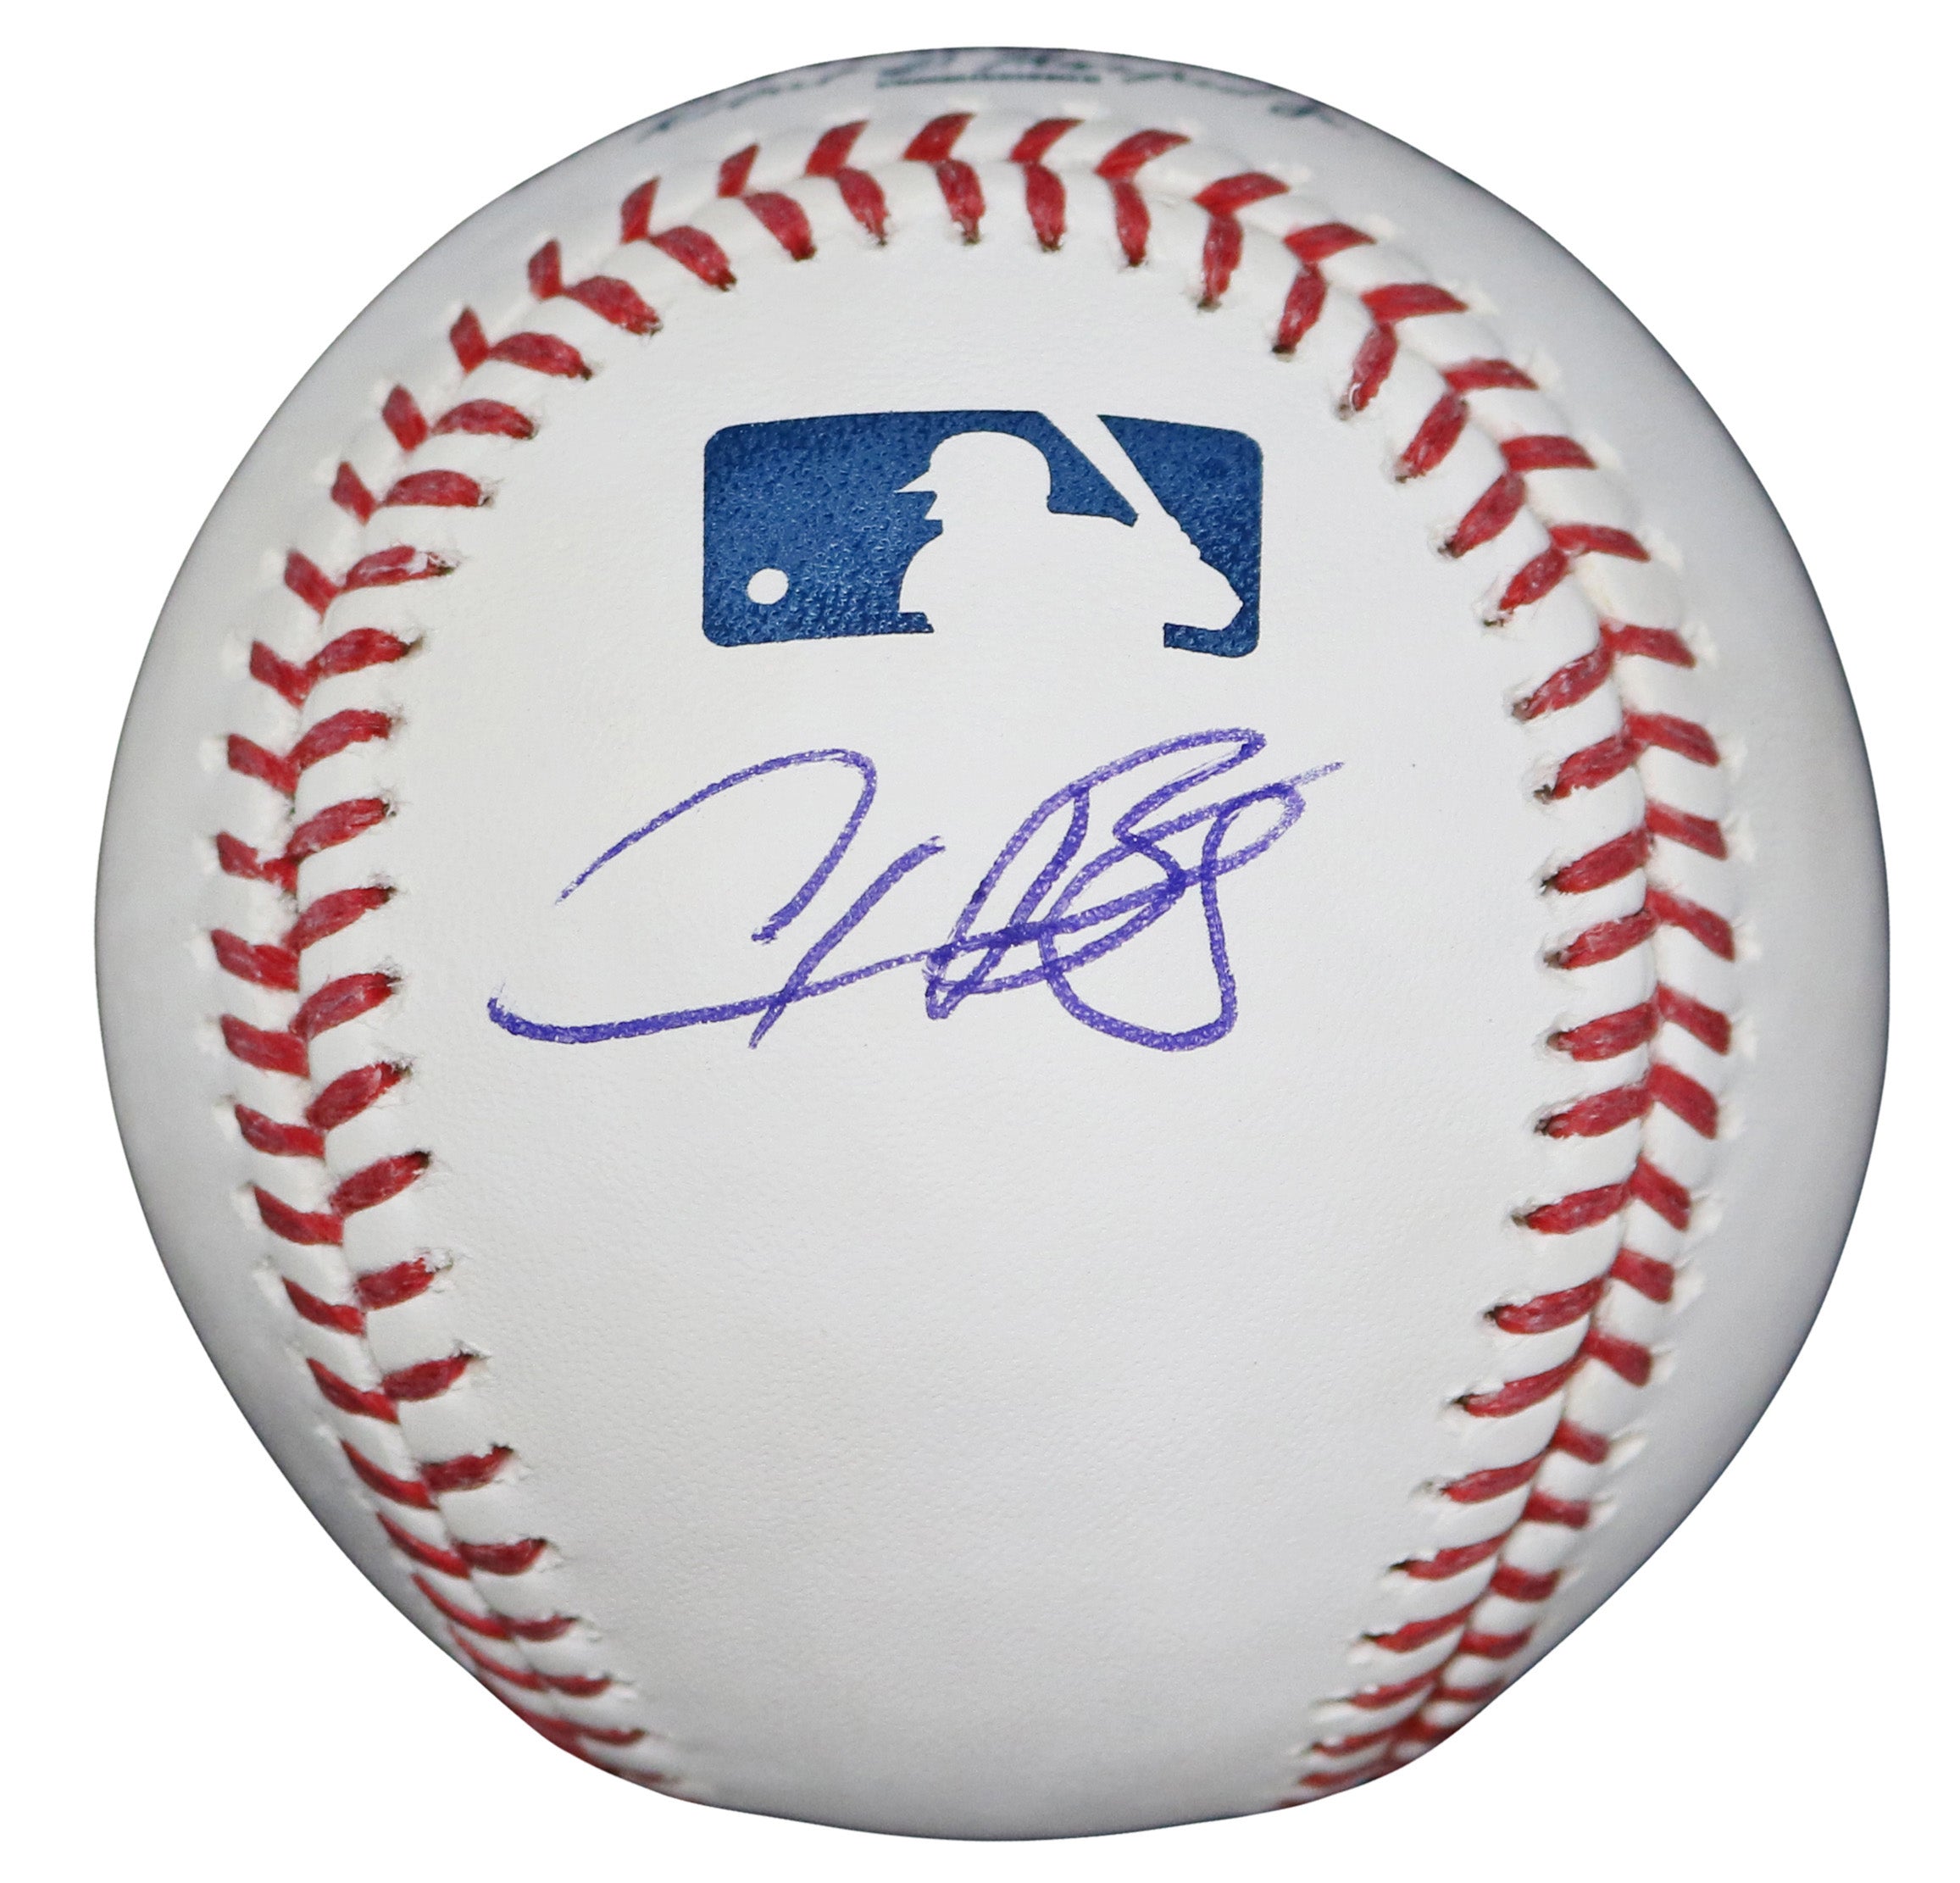 Alex Bregman Houston Astros Signed Autographed Rawlings Official Major League Baseball with Display Holder